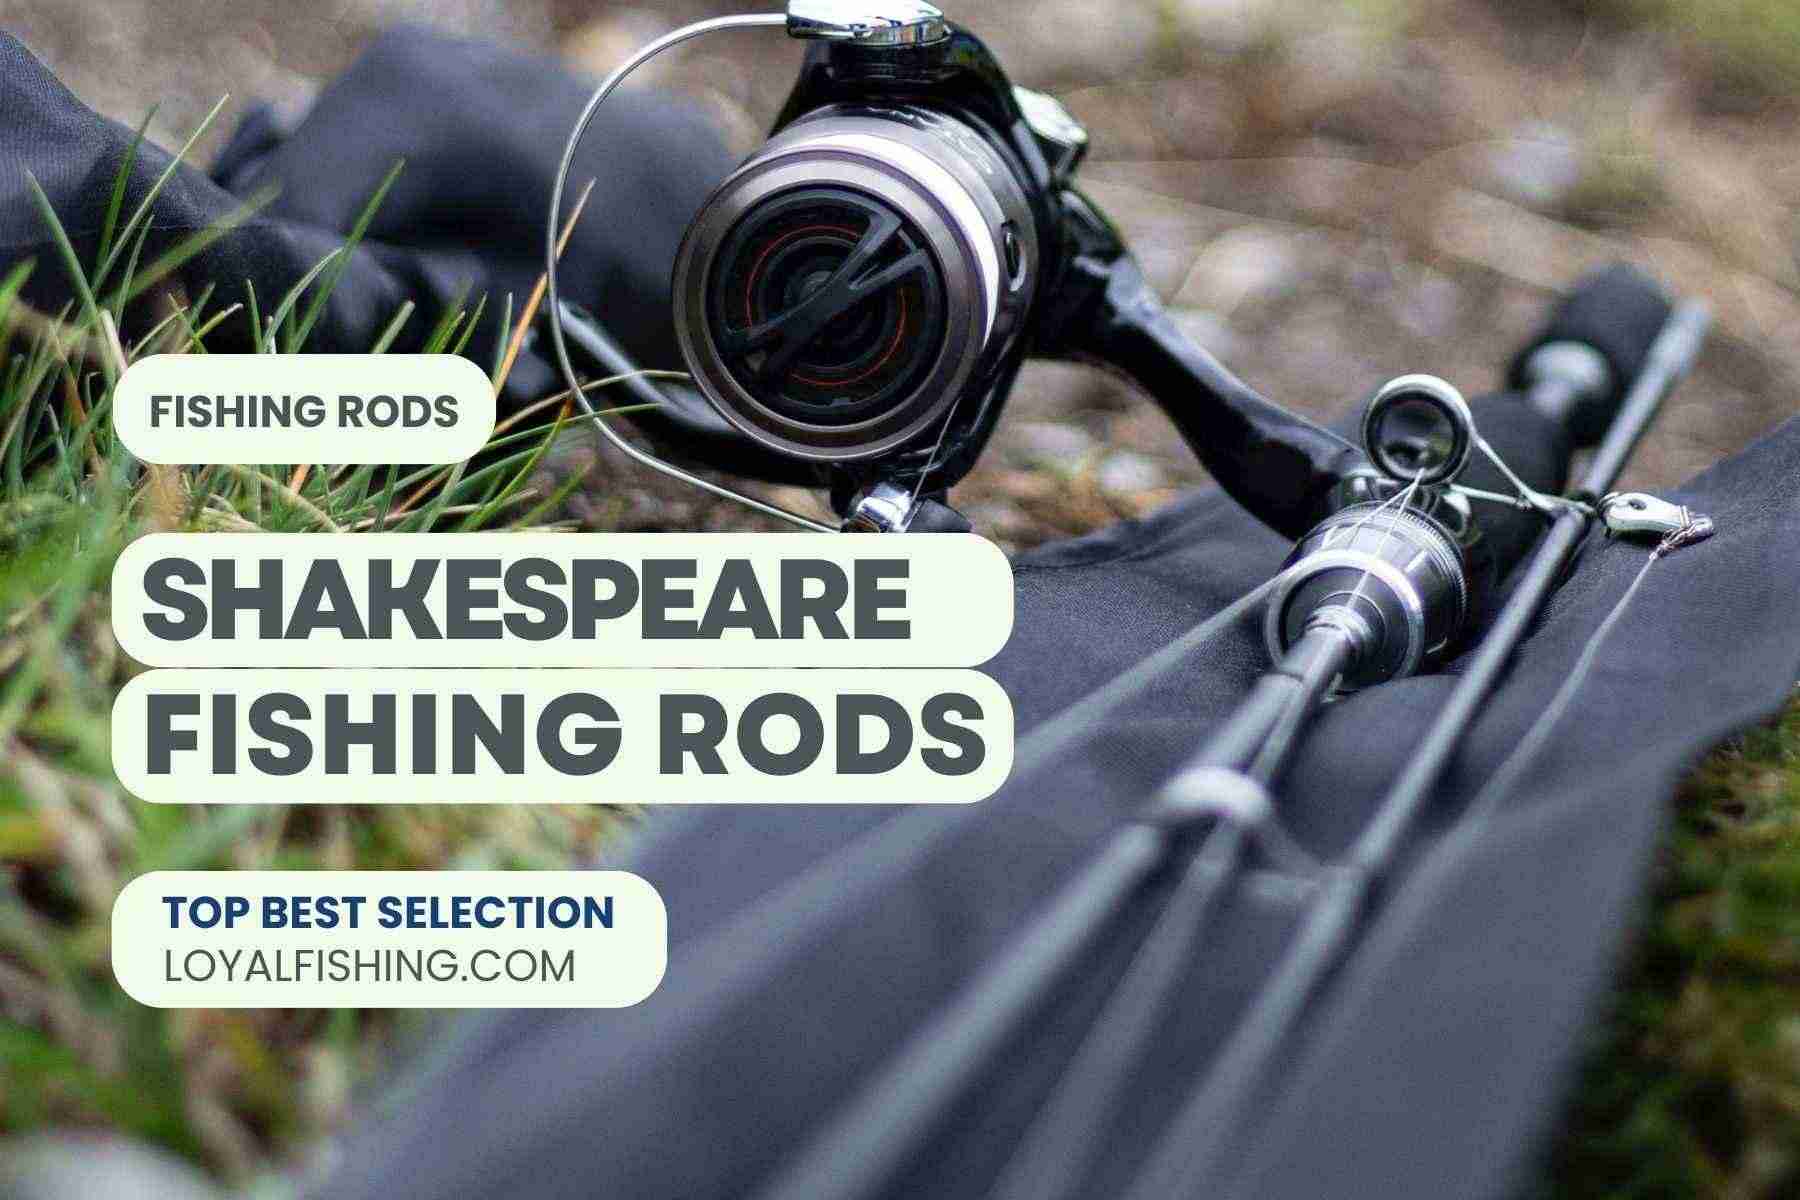 Shakespeare Fishing Rods Review